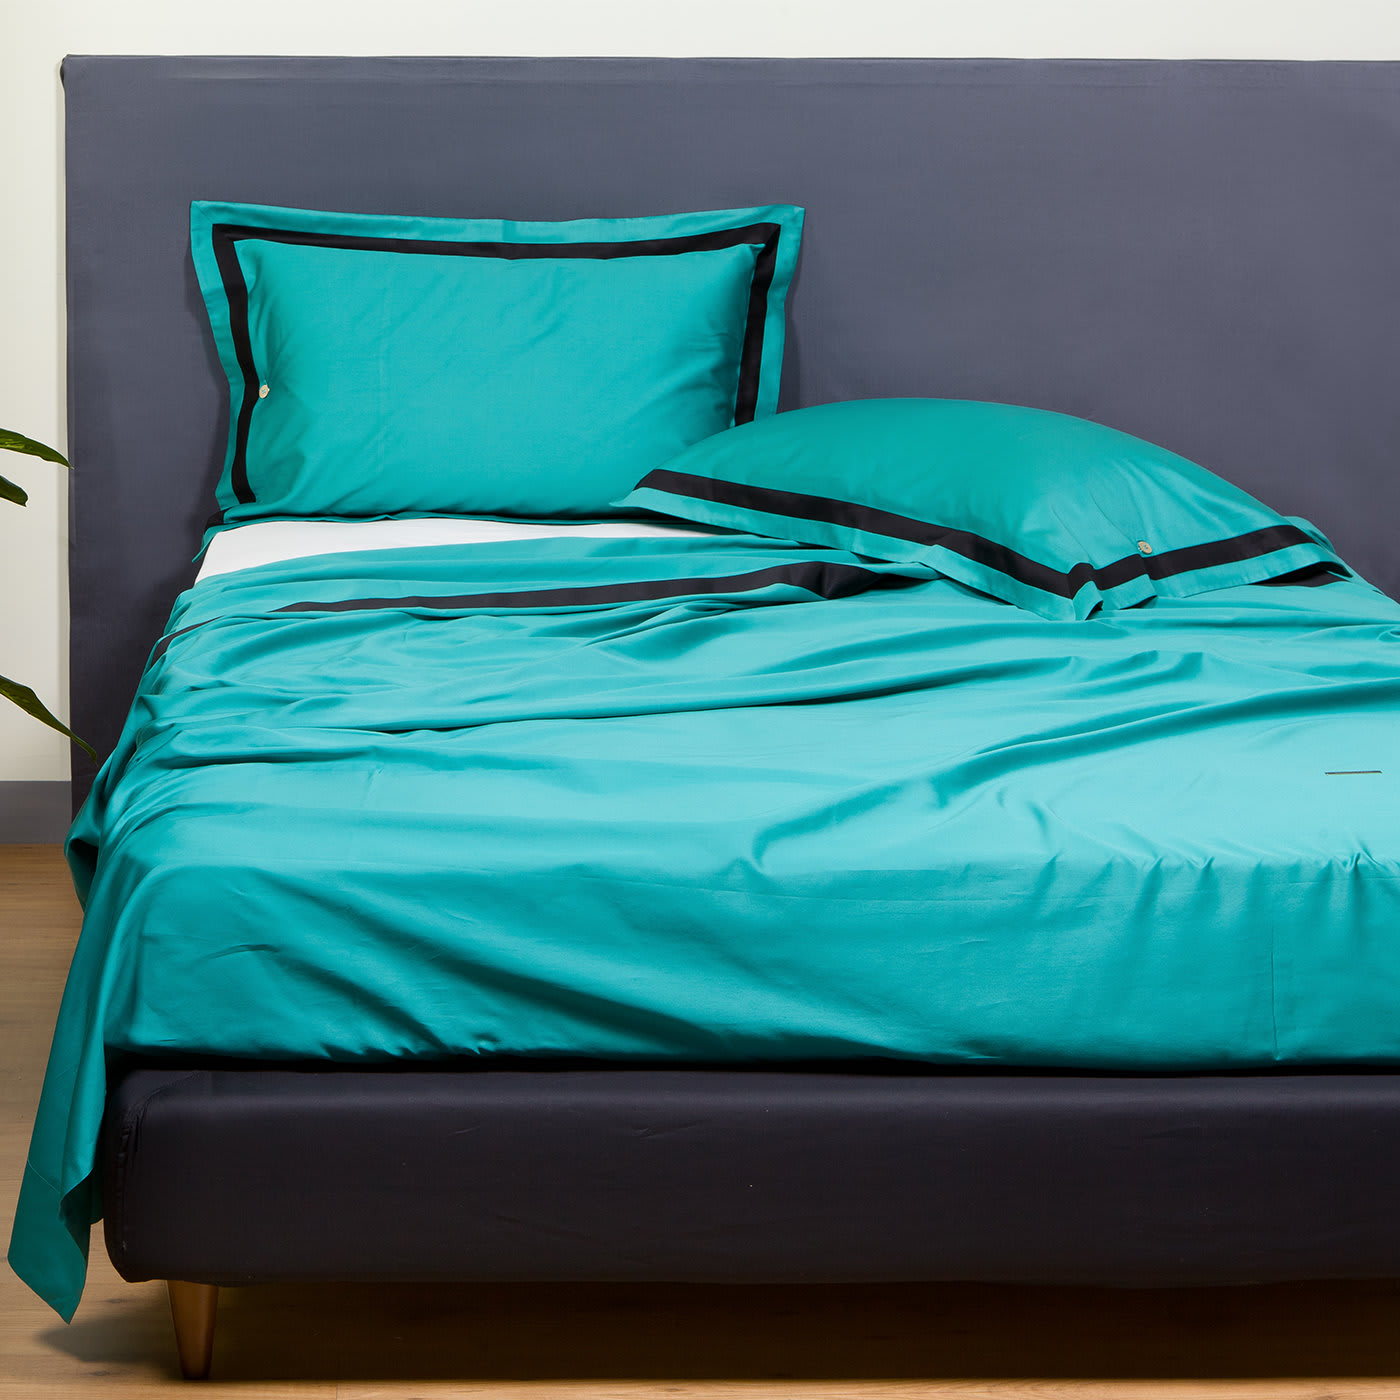 Summer Bedding Set - Teal  - Alessandro Di Marco